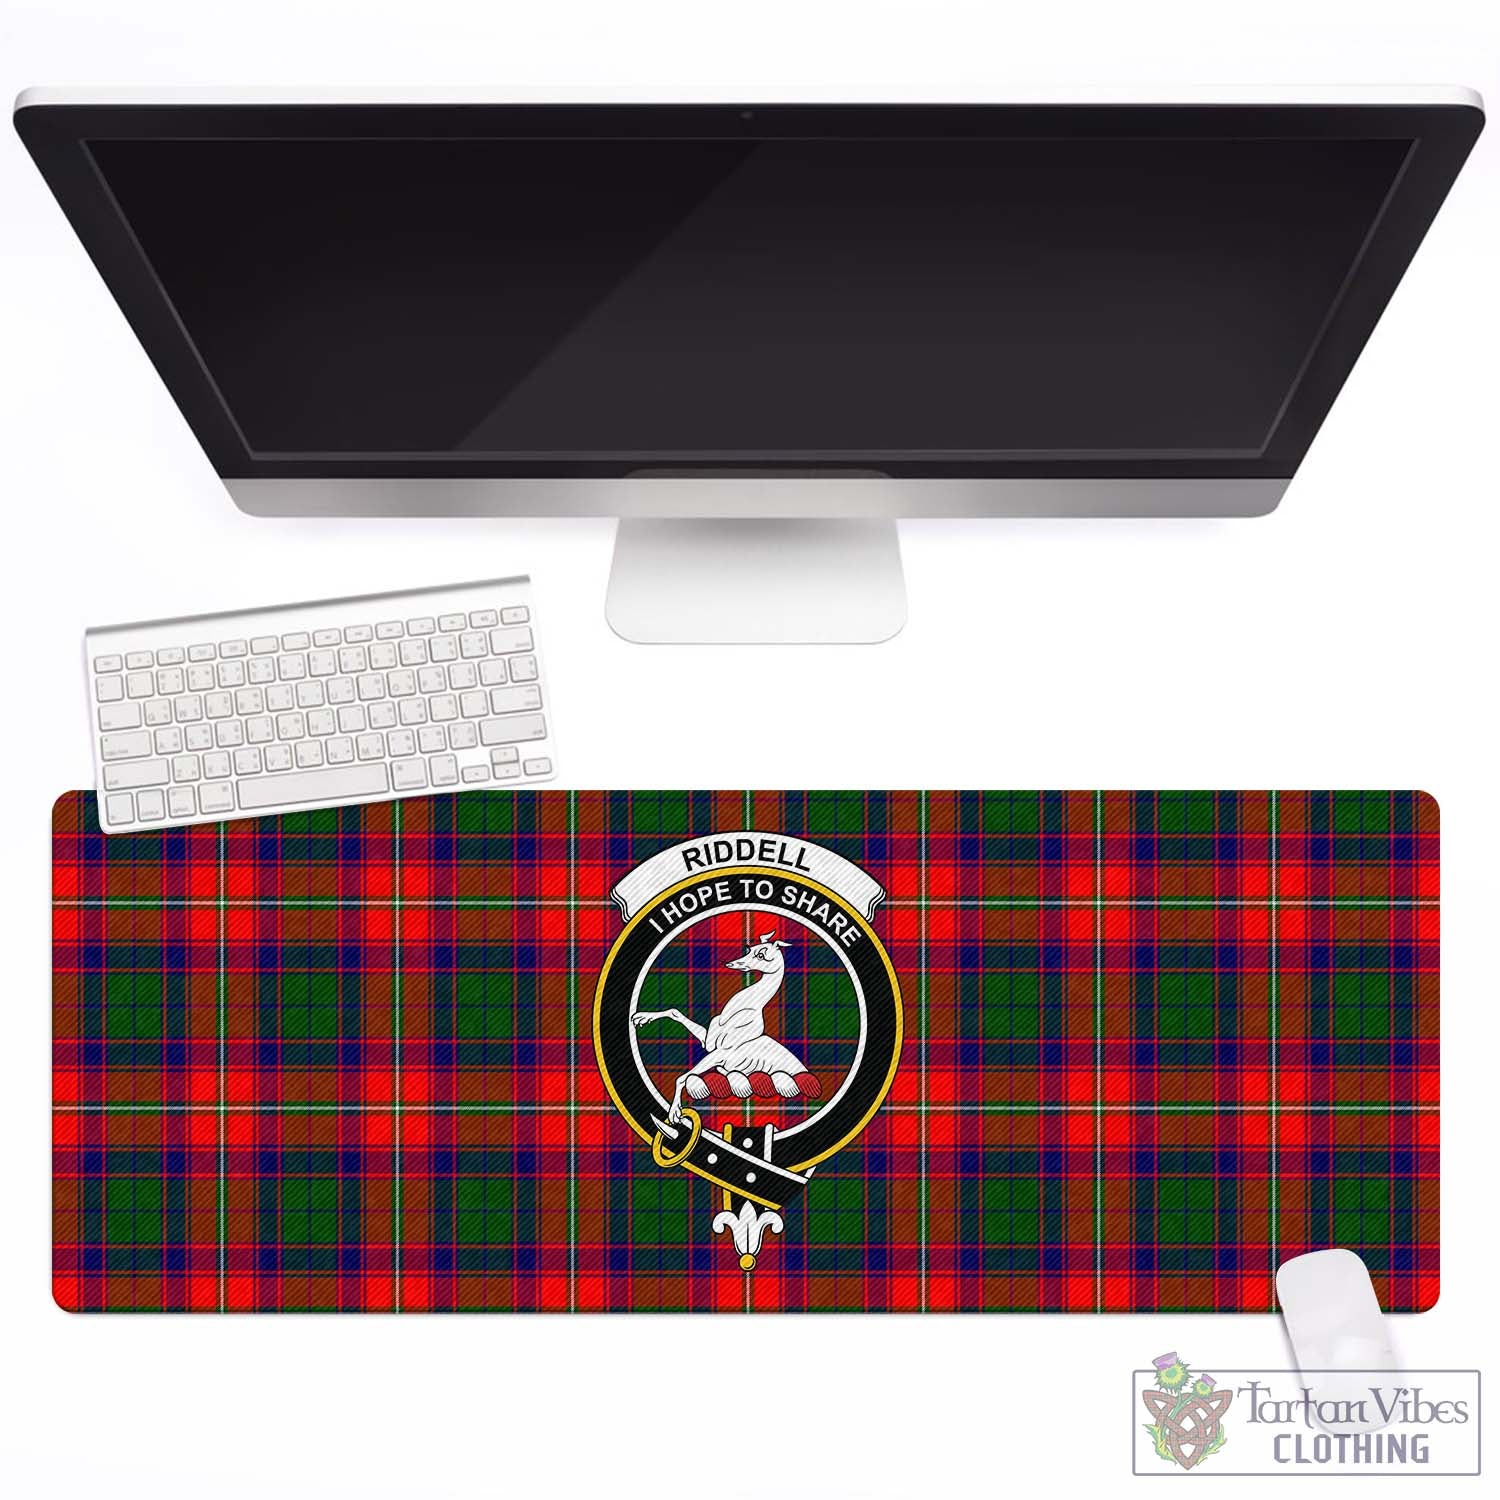 Tartan Vibes Clothing Riddell Tartan Mouse Pad with Family Crest